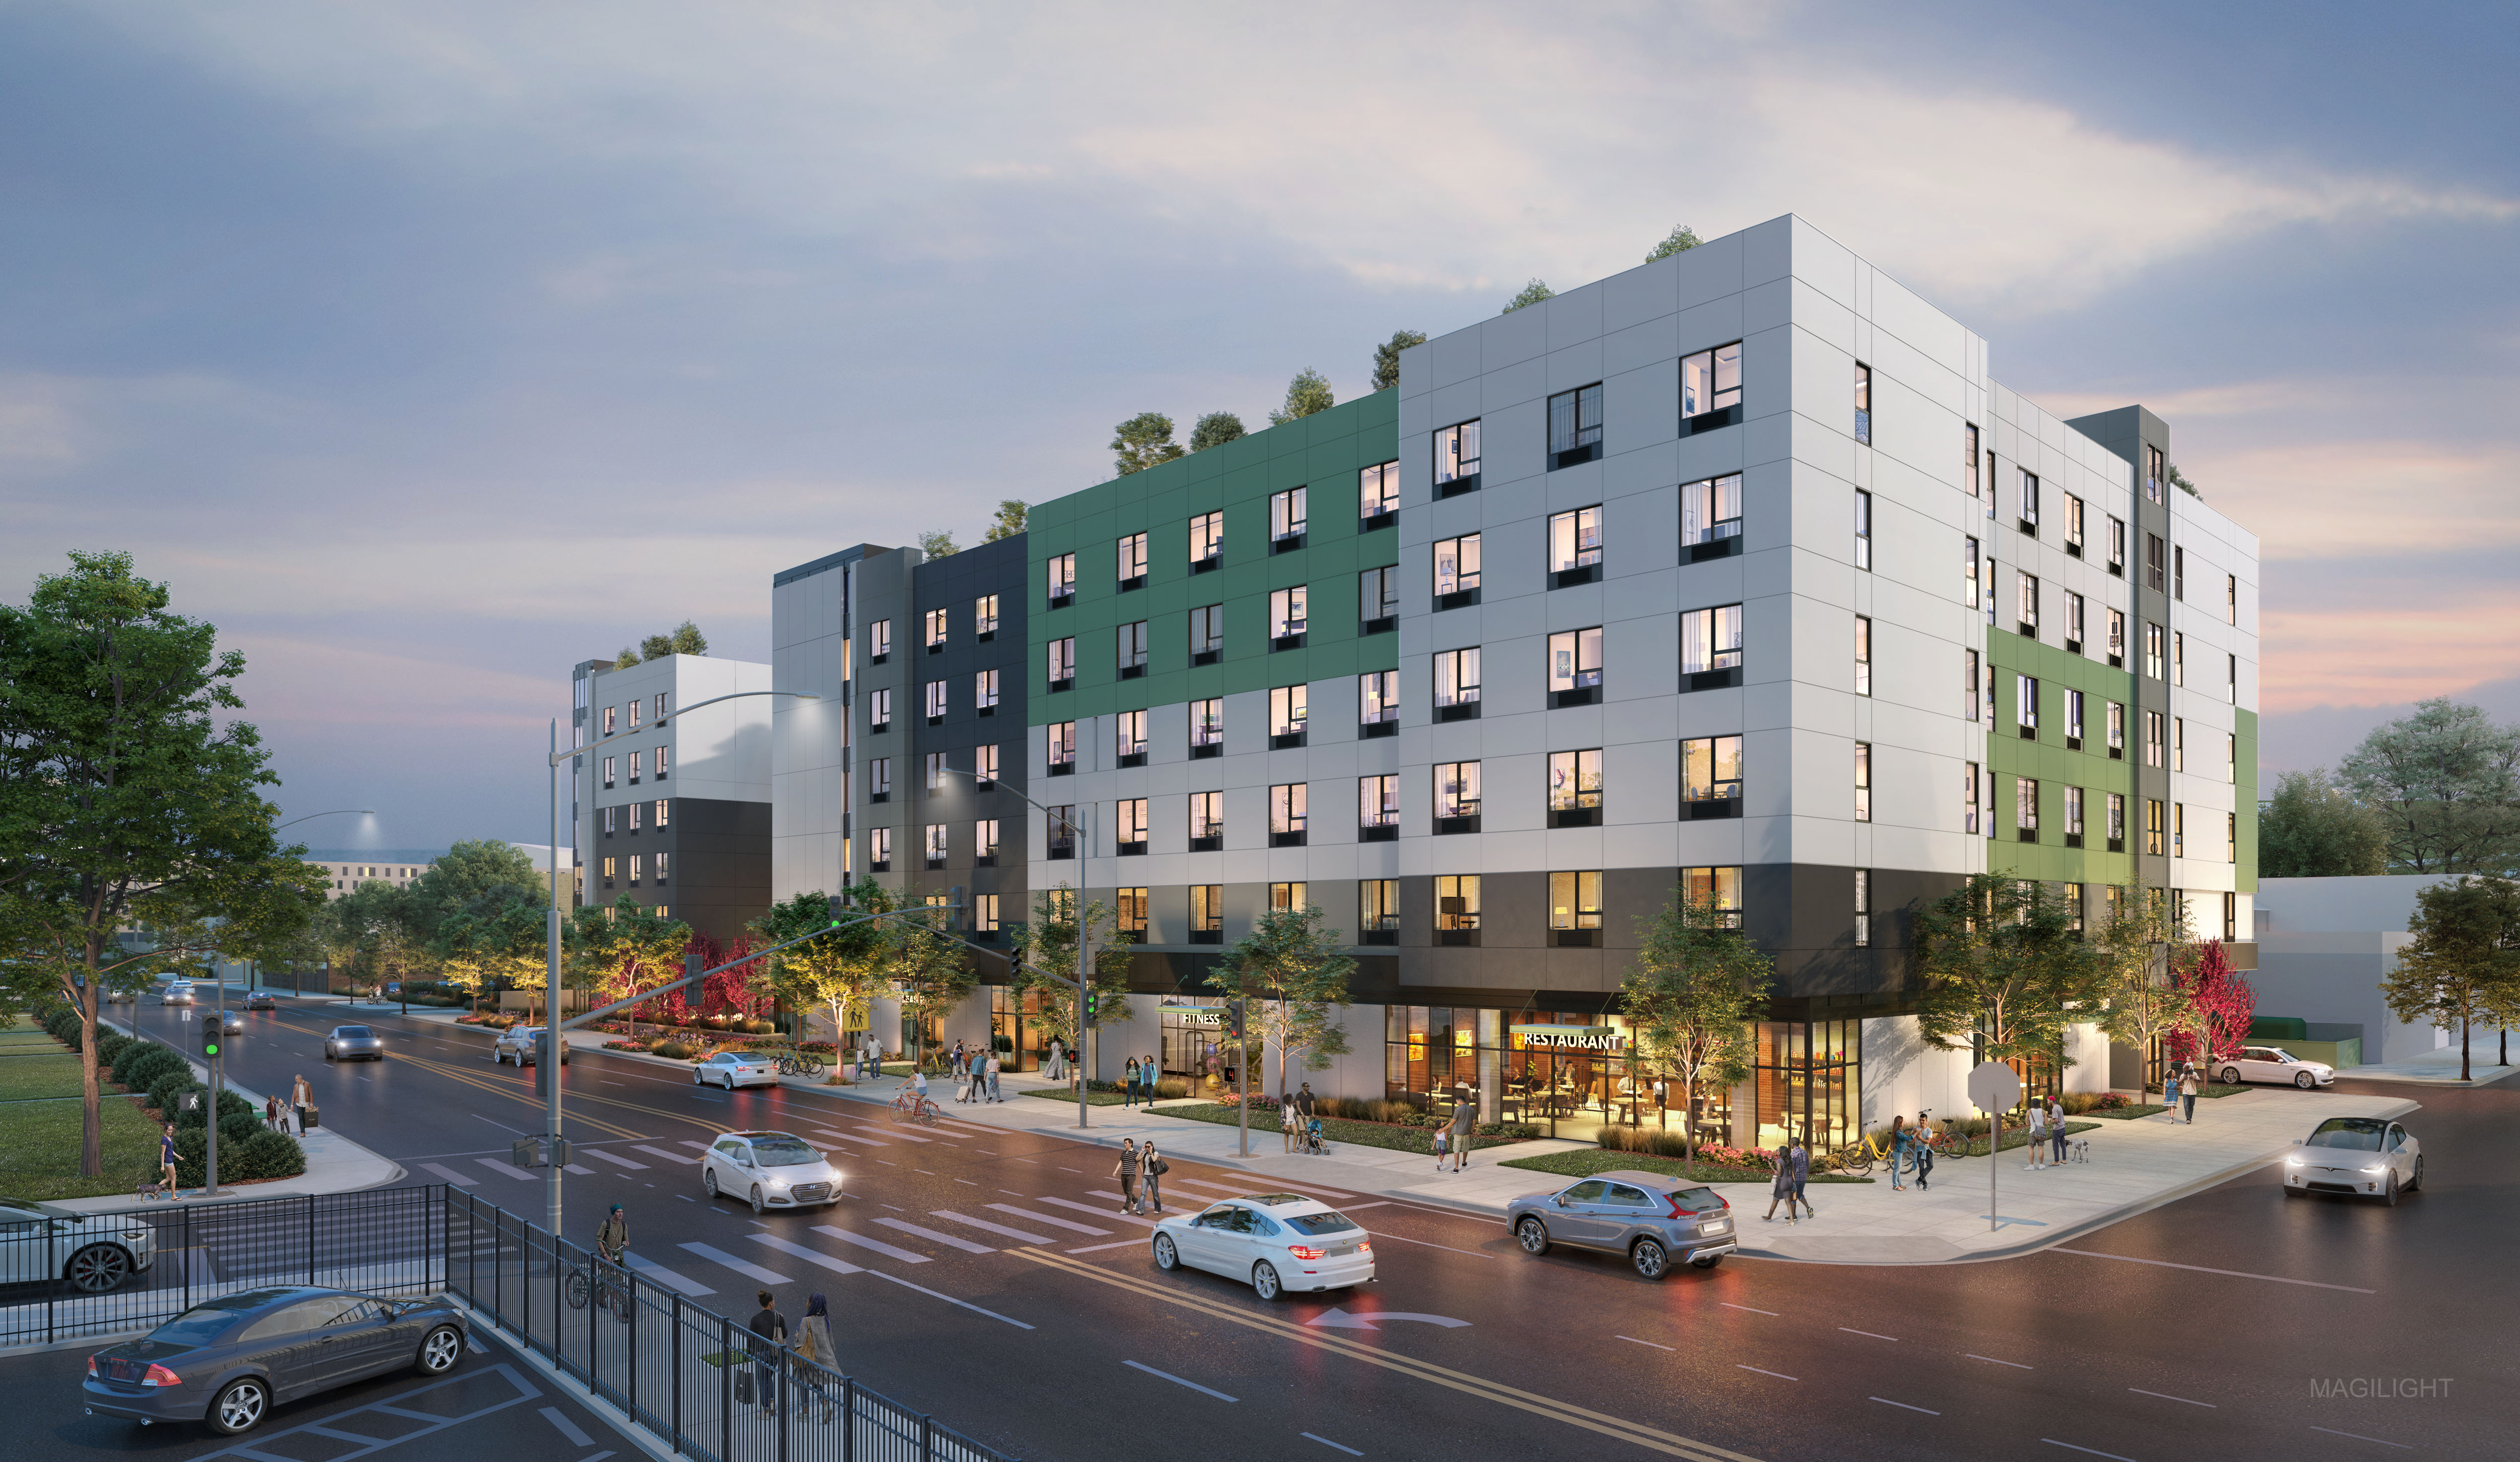 Former Industrial Site Being Transformed into 376-Unit Affordable and  Workforce Apartment Community to Meet Housing Need in Los Angeles